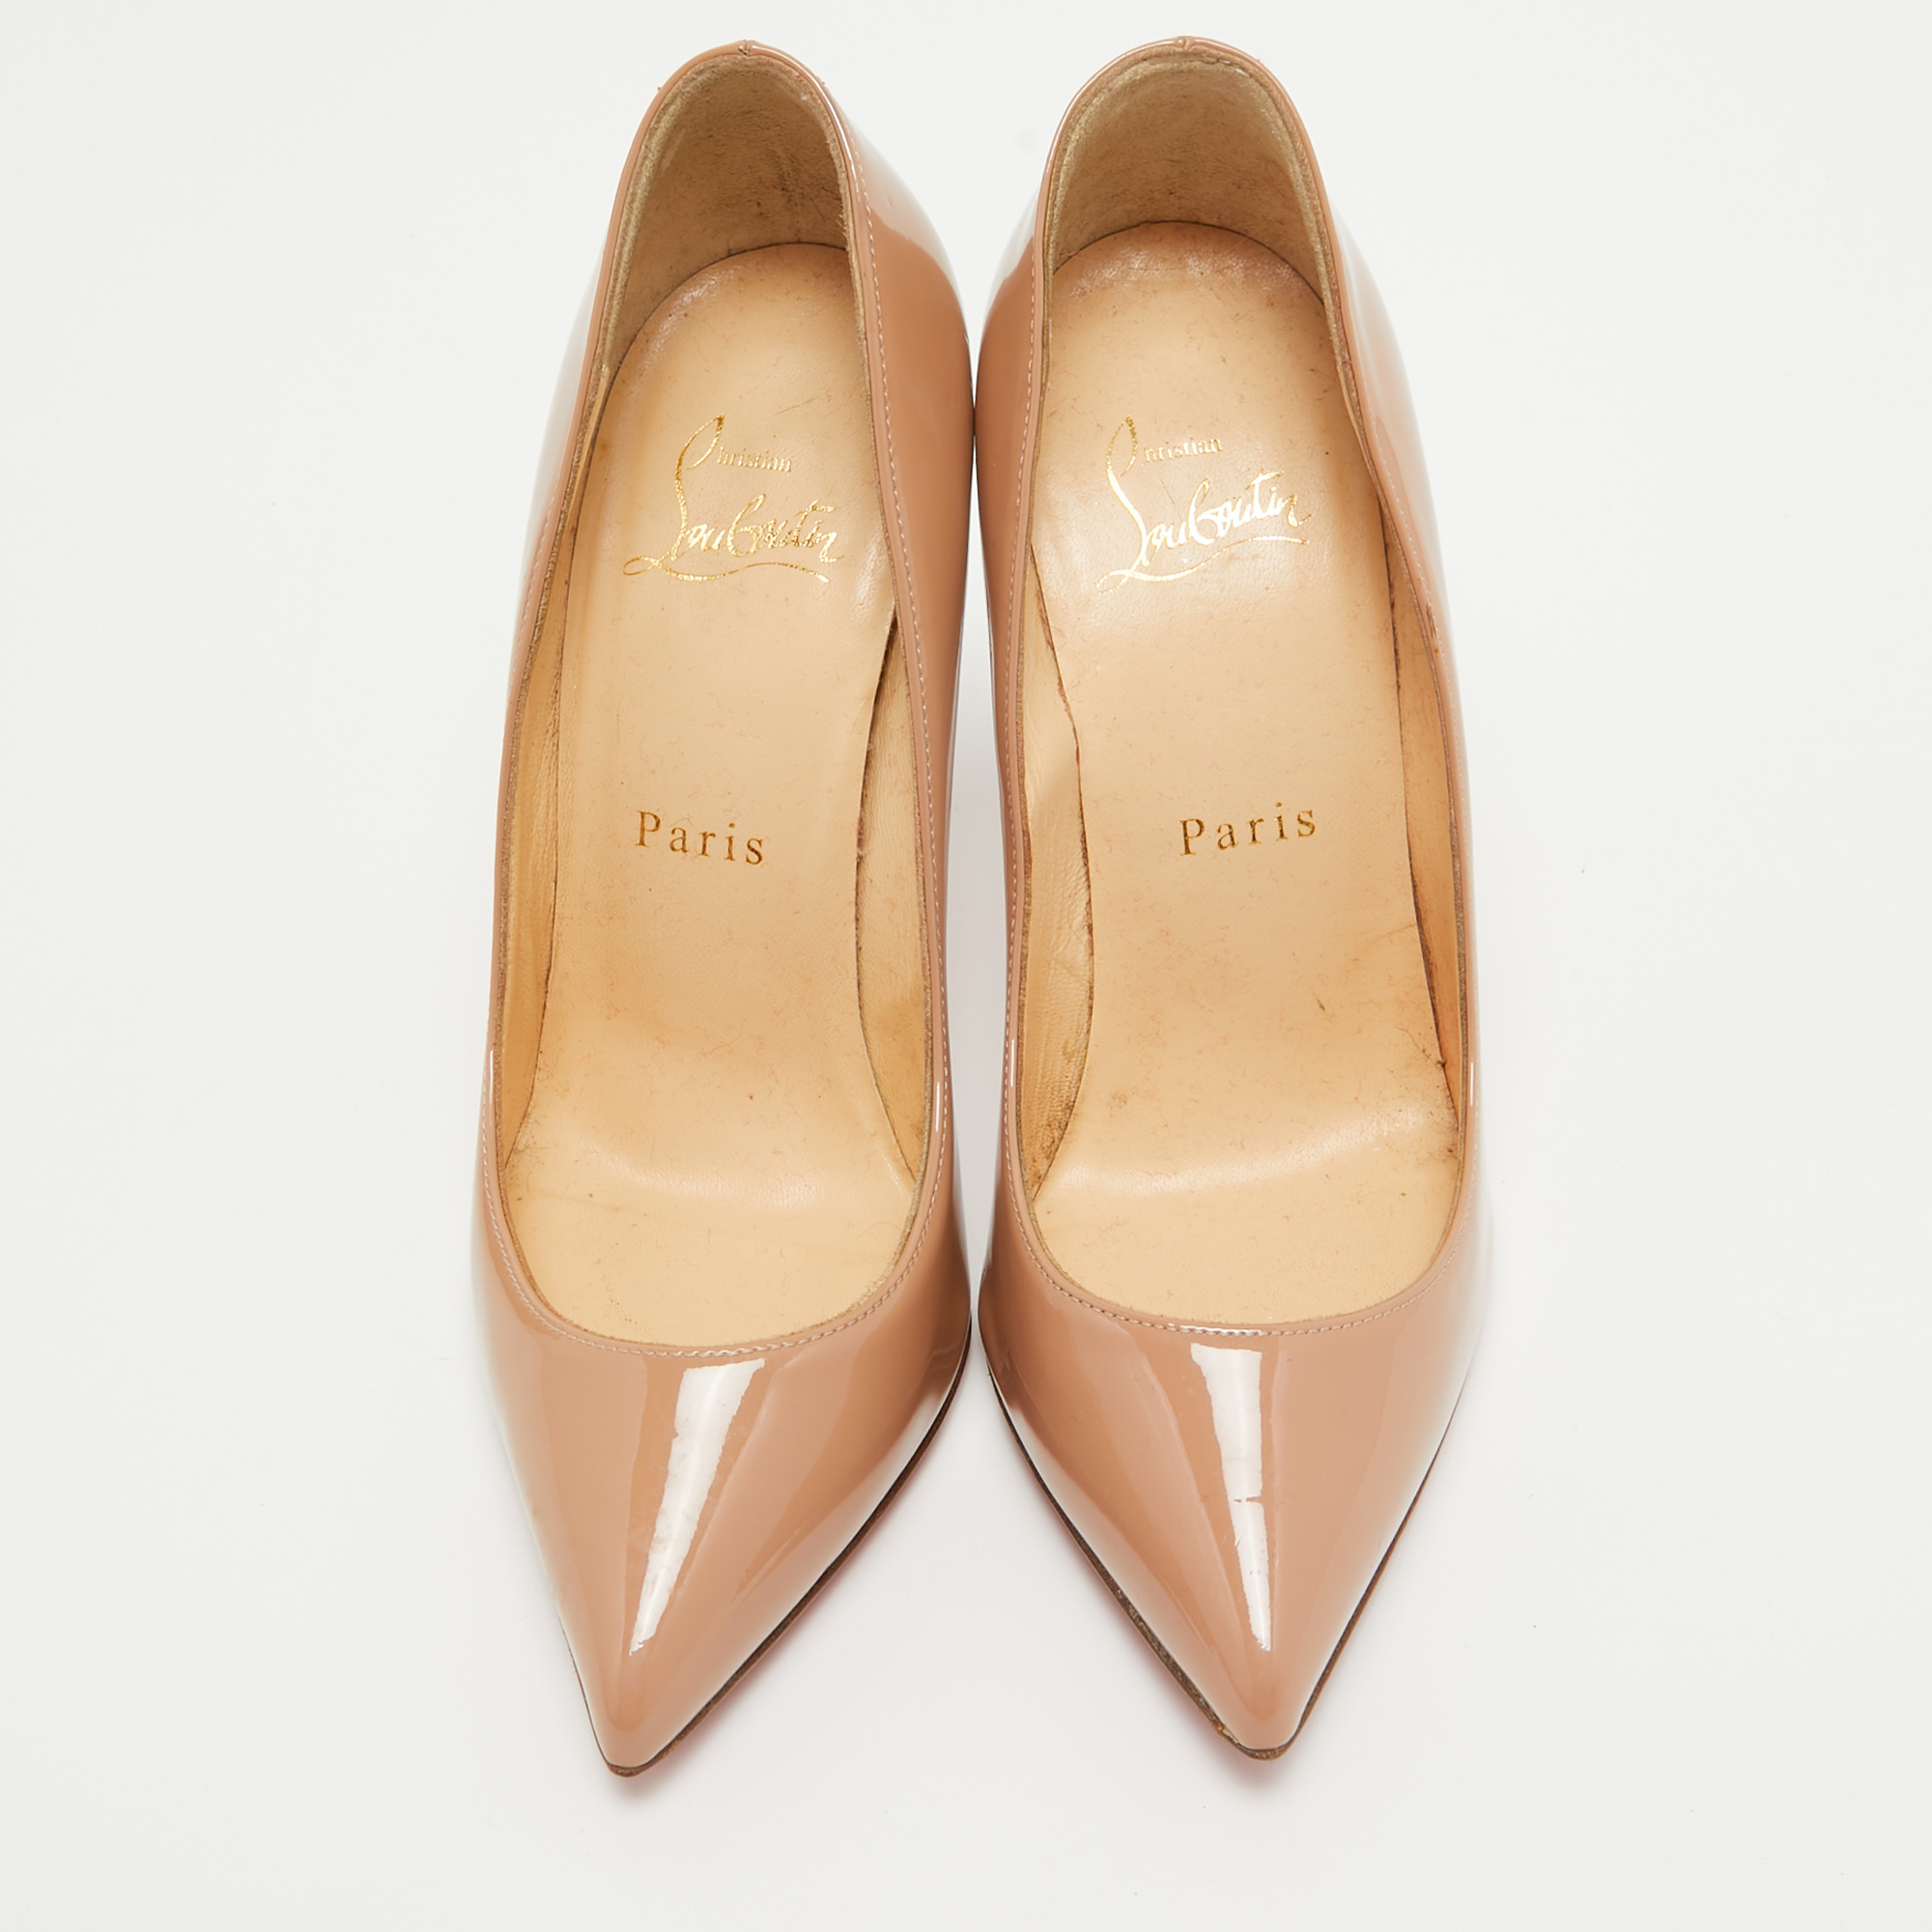 Christian Louboutin Beige Patent Leather Pigalle Pumps Size 35.5